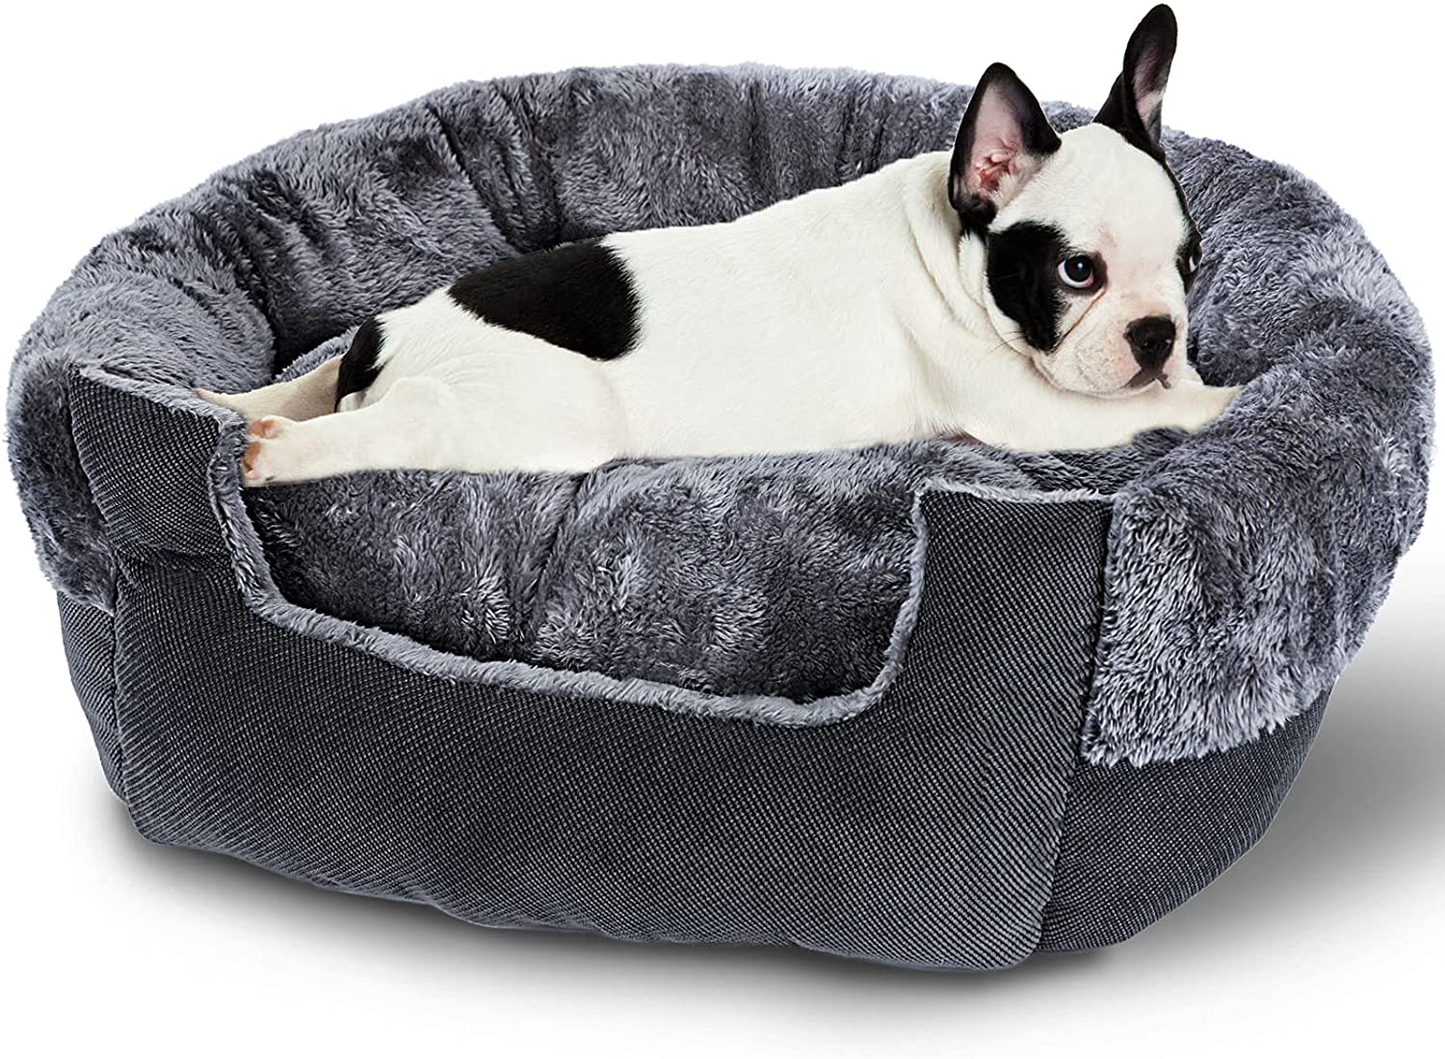 GASUR Dog Beds for Small Dogs & Cat Beds for Indoor Cats, Detachable Machine Washable Soft & Plush Calming Dog Bed, round Pet Beds for Indoor Cats, Warming & Cooling Kitten Puppy Bed Animals & Pet Supplies > Pet Supplies > Cat Supplies > Cat Beds GASUR Bluish grey 25*25 inch 